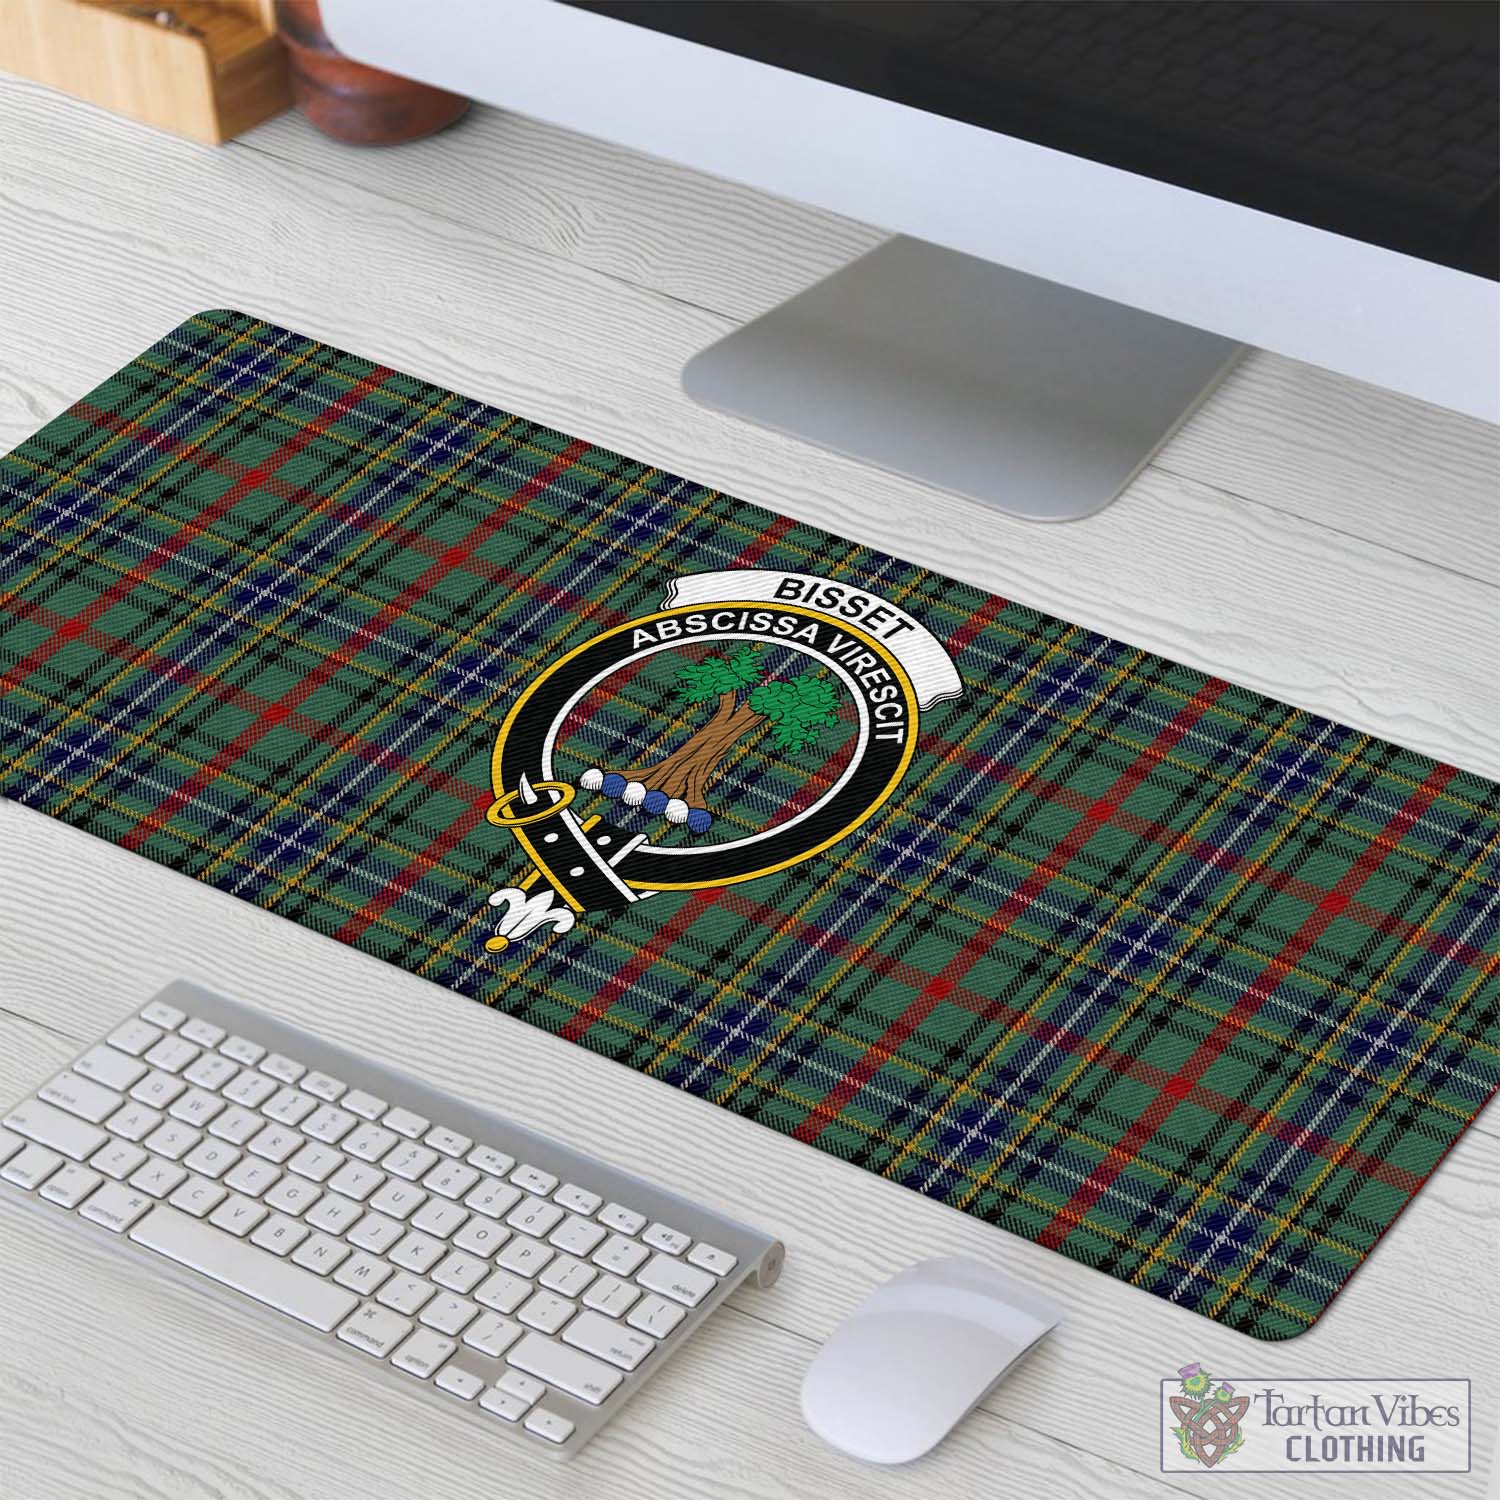 Tartan Vibes Clothing Bisset Tartan Mouse Pad with Family Crest